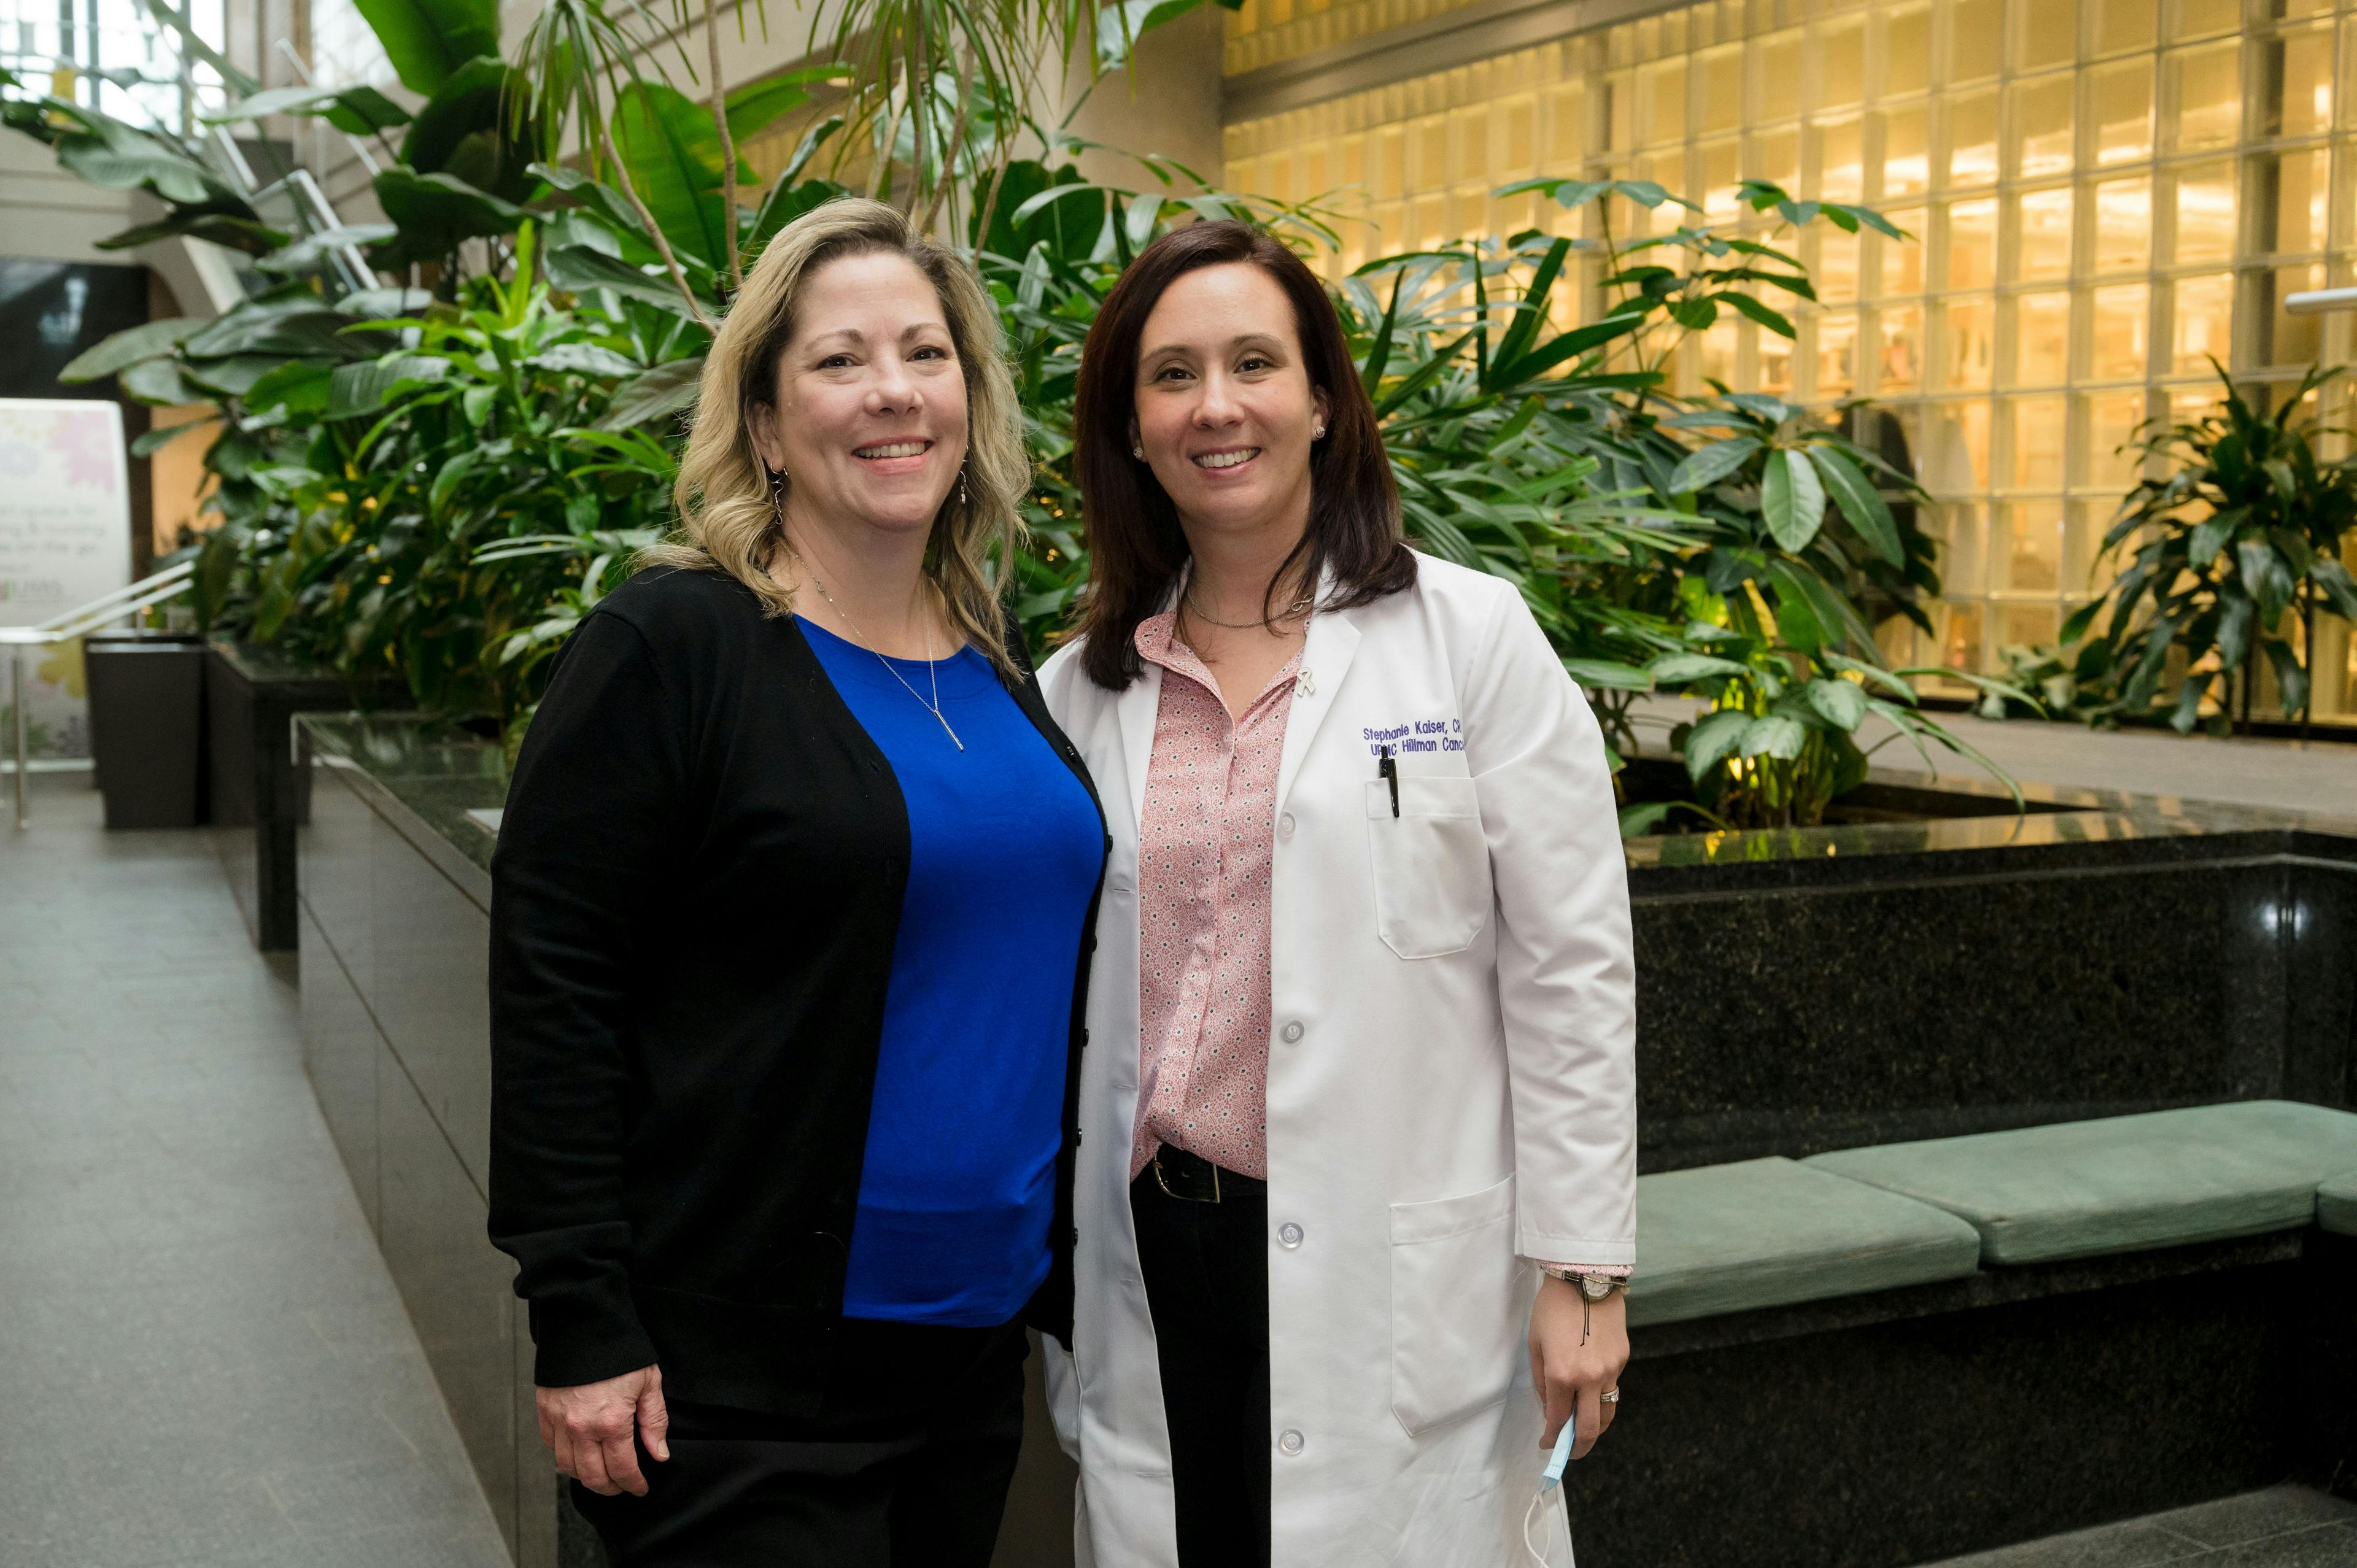 Recognizing an Oncology Nurse Who Has Been a Guardian Angel And Co-Pilot During a Patient’s Unexpected Cancer Journey